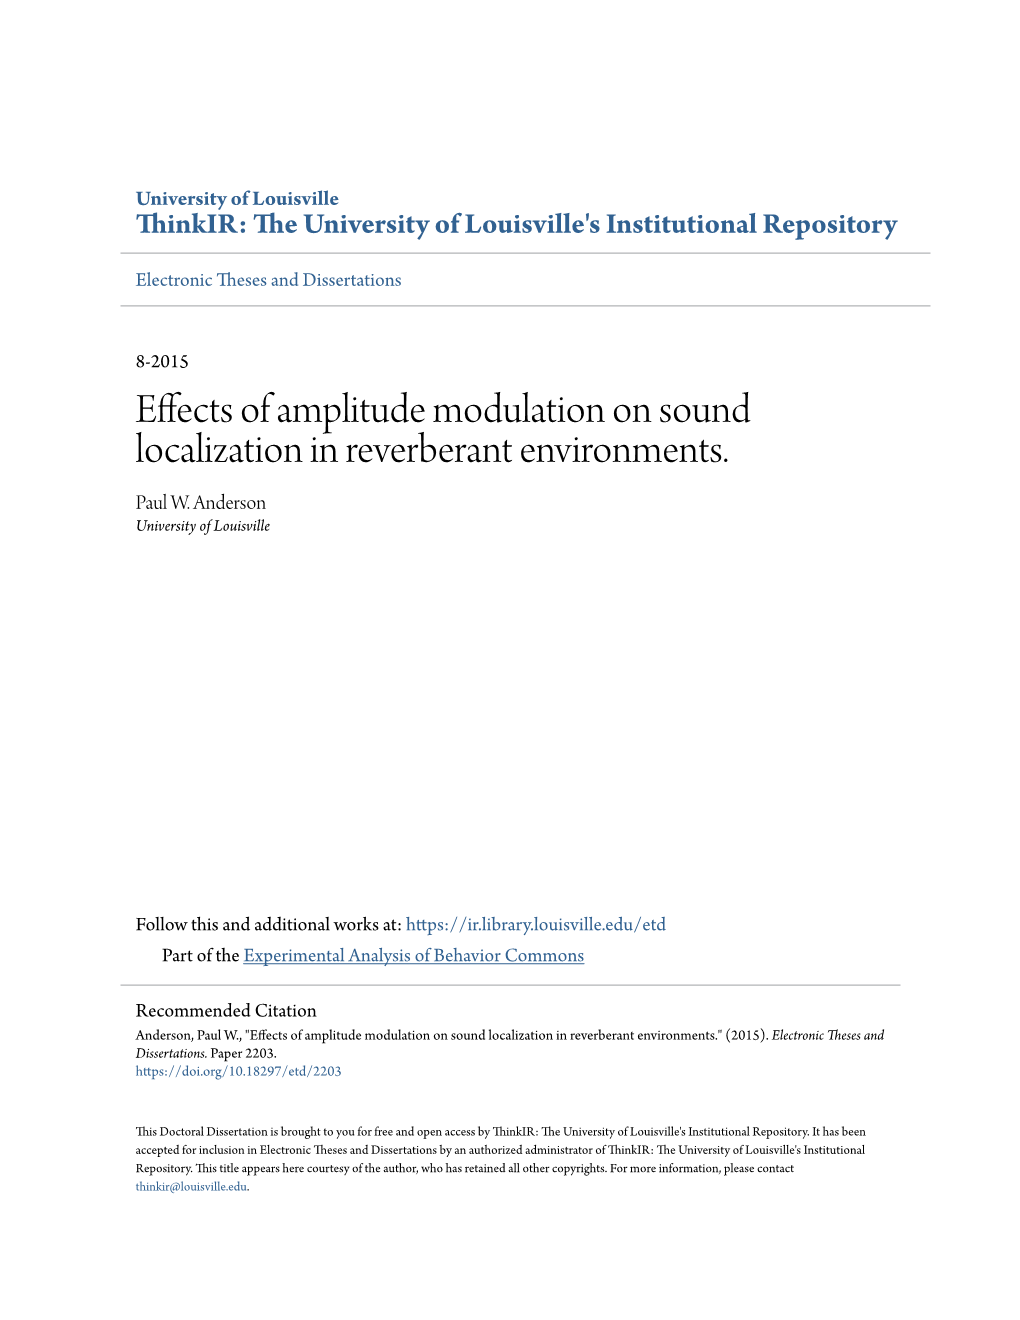 Effects of Amplitude Modulation on Sound Localization in Reverberant Environments